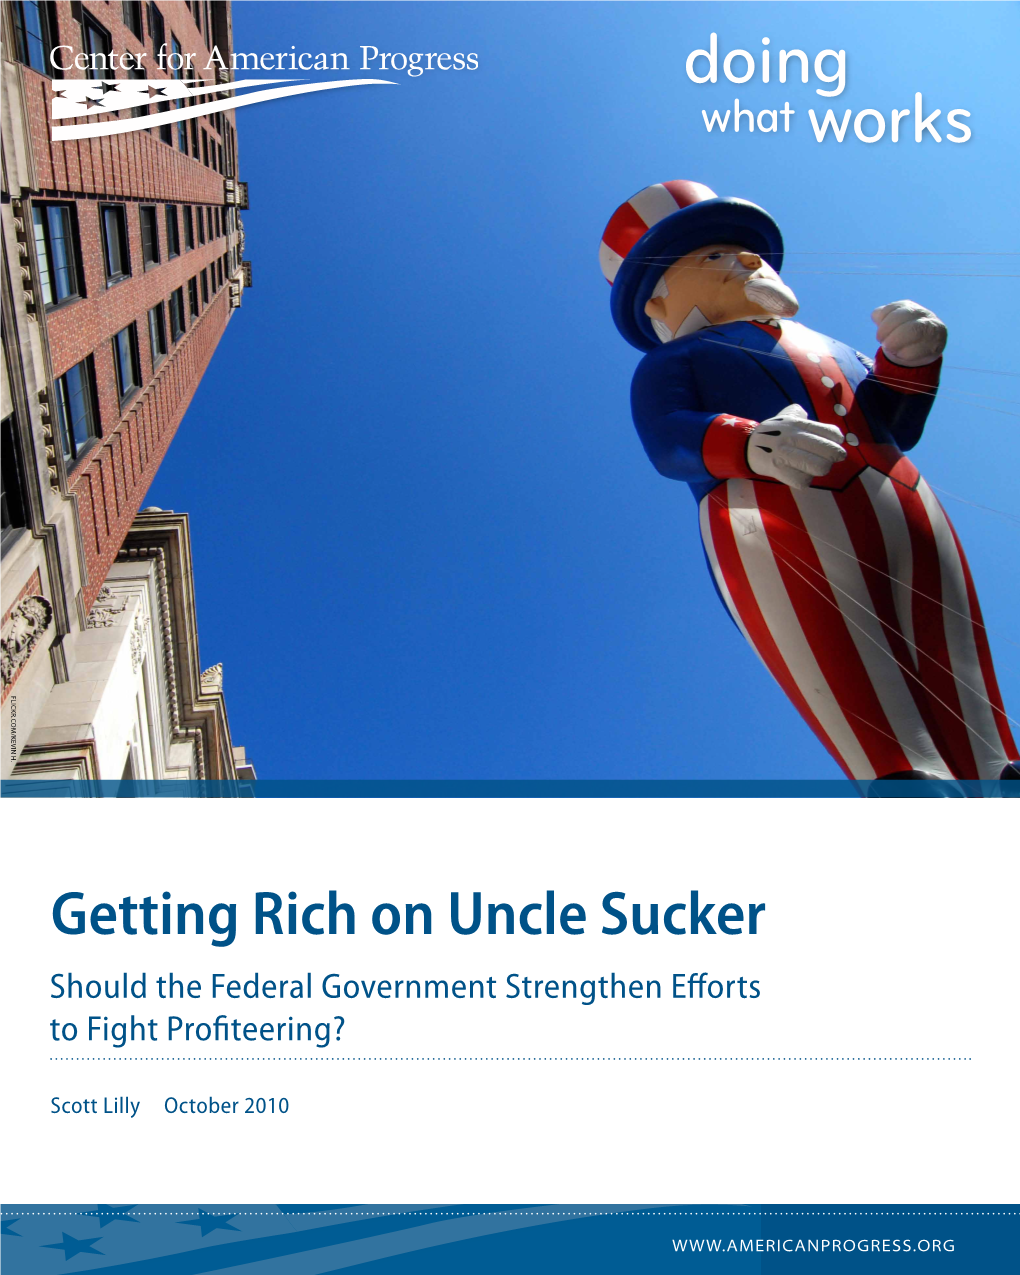 Getting Rich on Uncle Sucker Should the Federal Government Strengthen Efforts to Fight Profiteering?